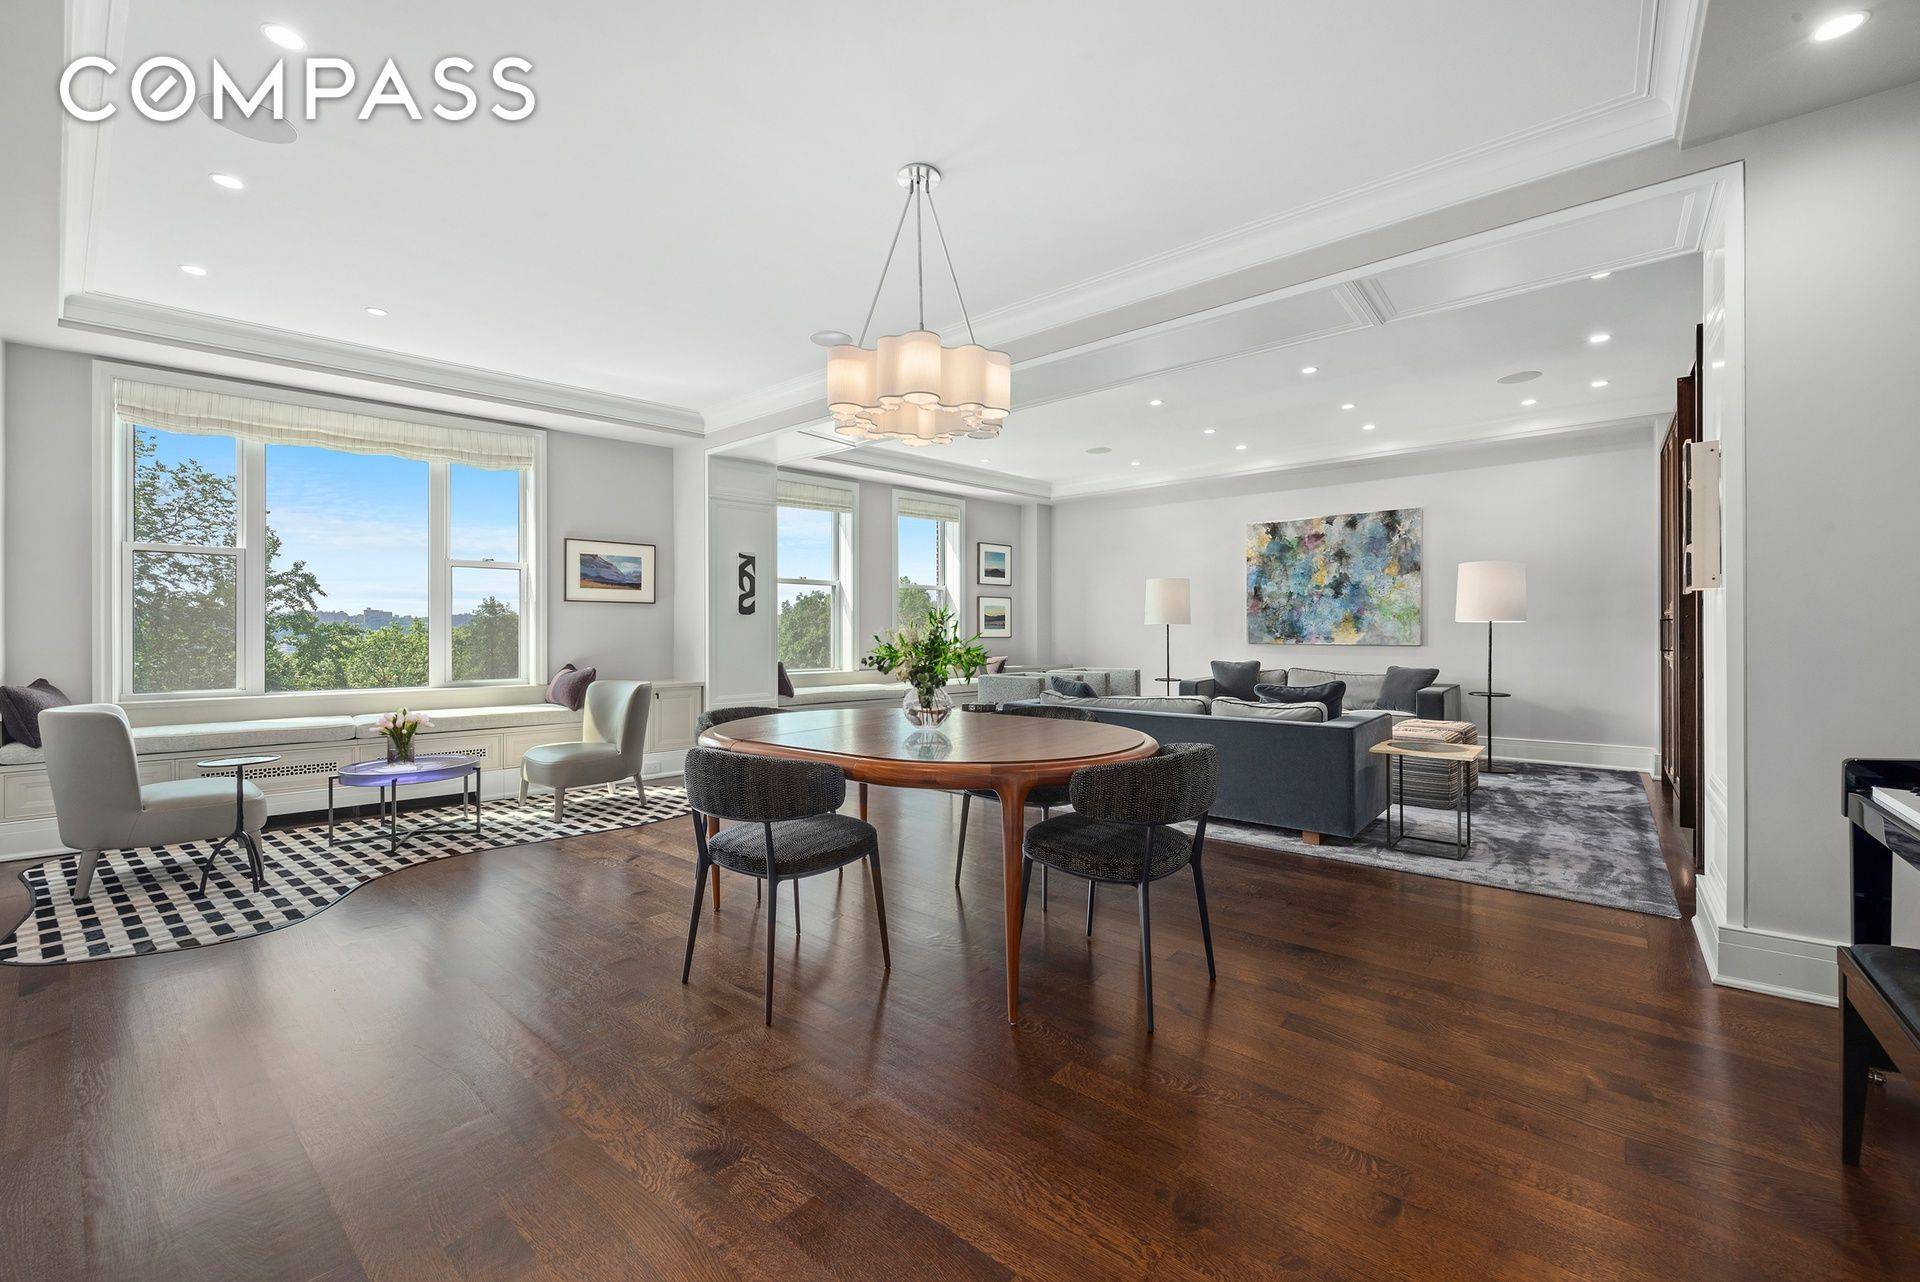 Welcome to this flawlessly designed two bedroom, two and a half bathroom home with north, south, east, and west exposures in one of the most desired cooperatives on Riverside Drive.